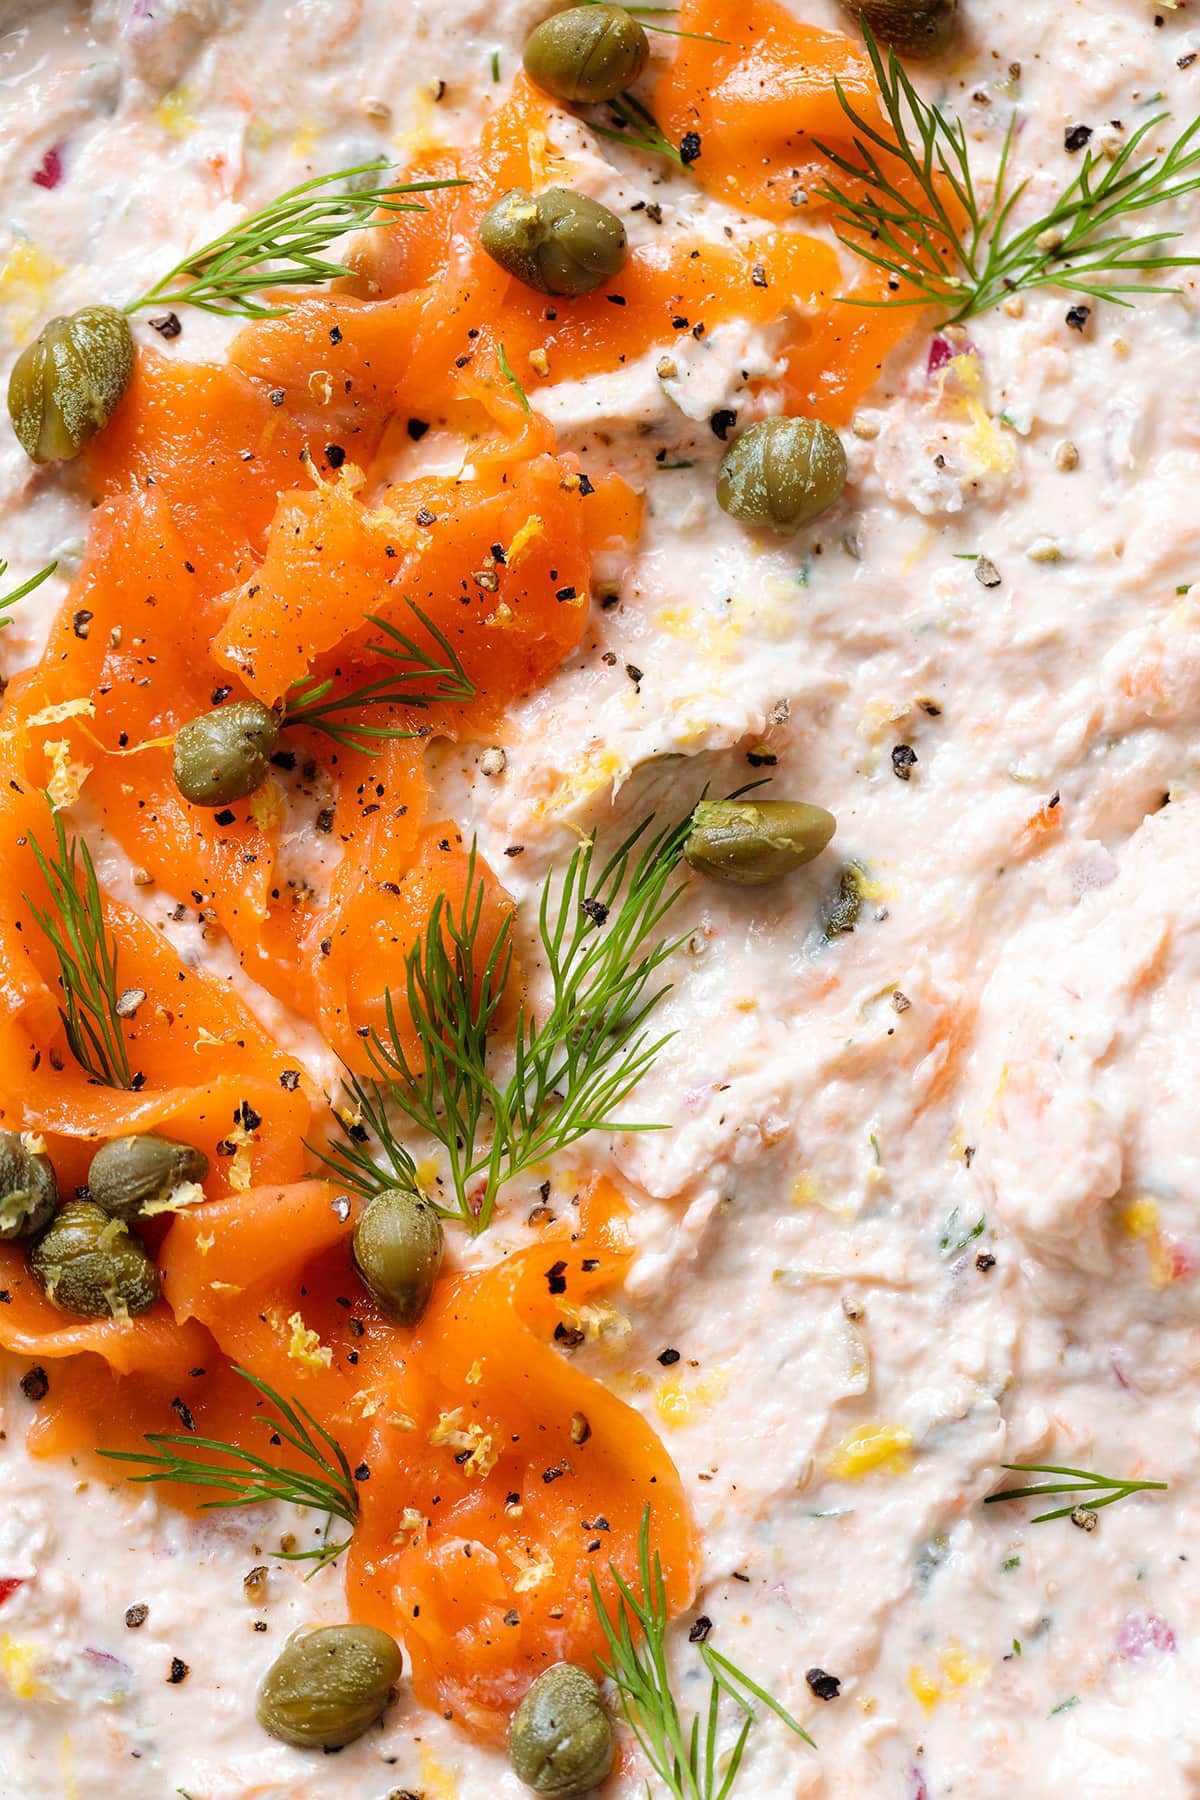 Smoked salmon dip garnished with more smoked salmon, capers, and fresh dill.